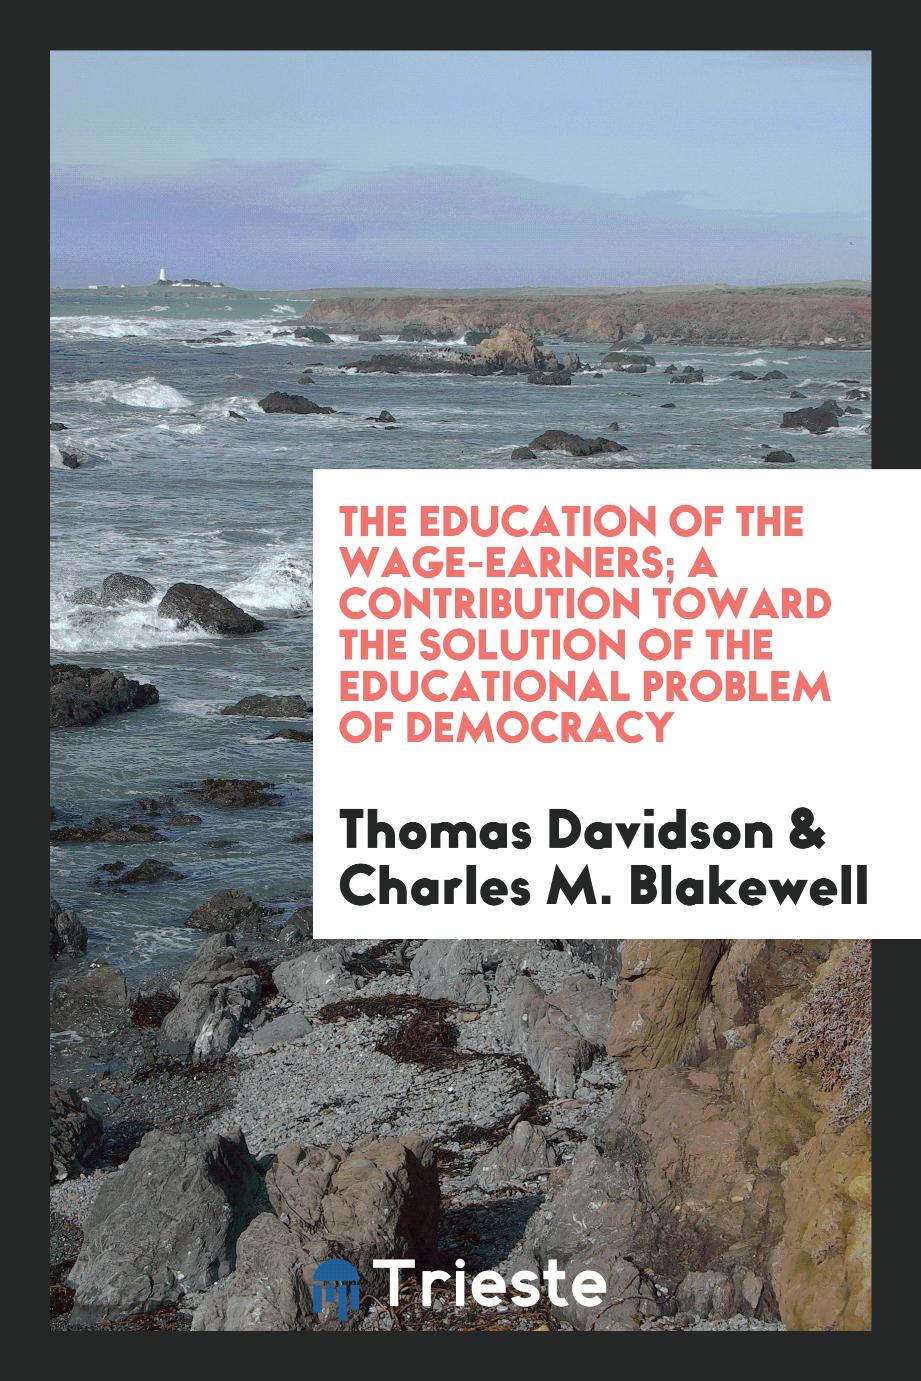 Thomas Davidson, Charles M. Blakewell - The Education of the Wage-Earners; A Contribution Toward the Solution of the Educational Problem of Democracy